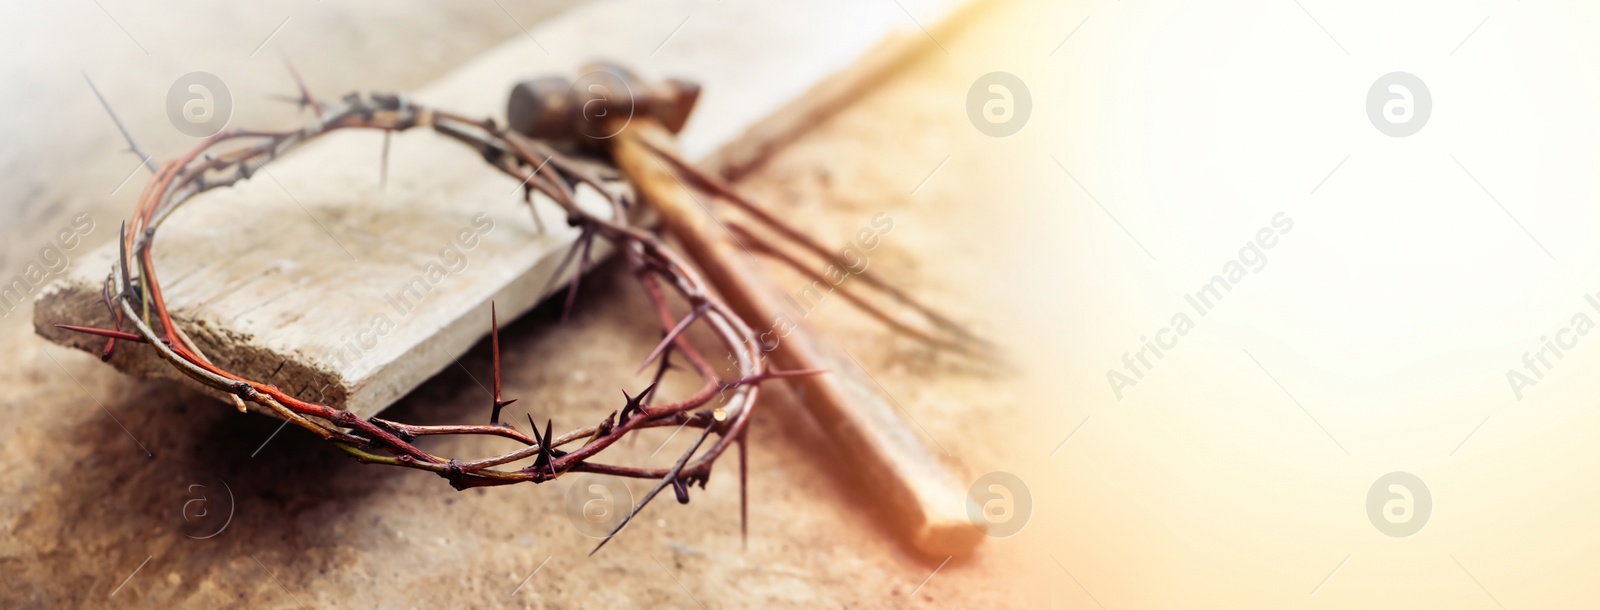 Image of Passion Of Jesus Christ. Crown of thorns, hammer and wooden plank on ground, banner design